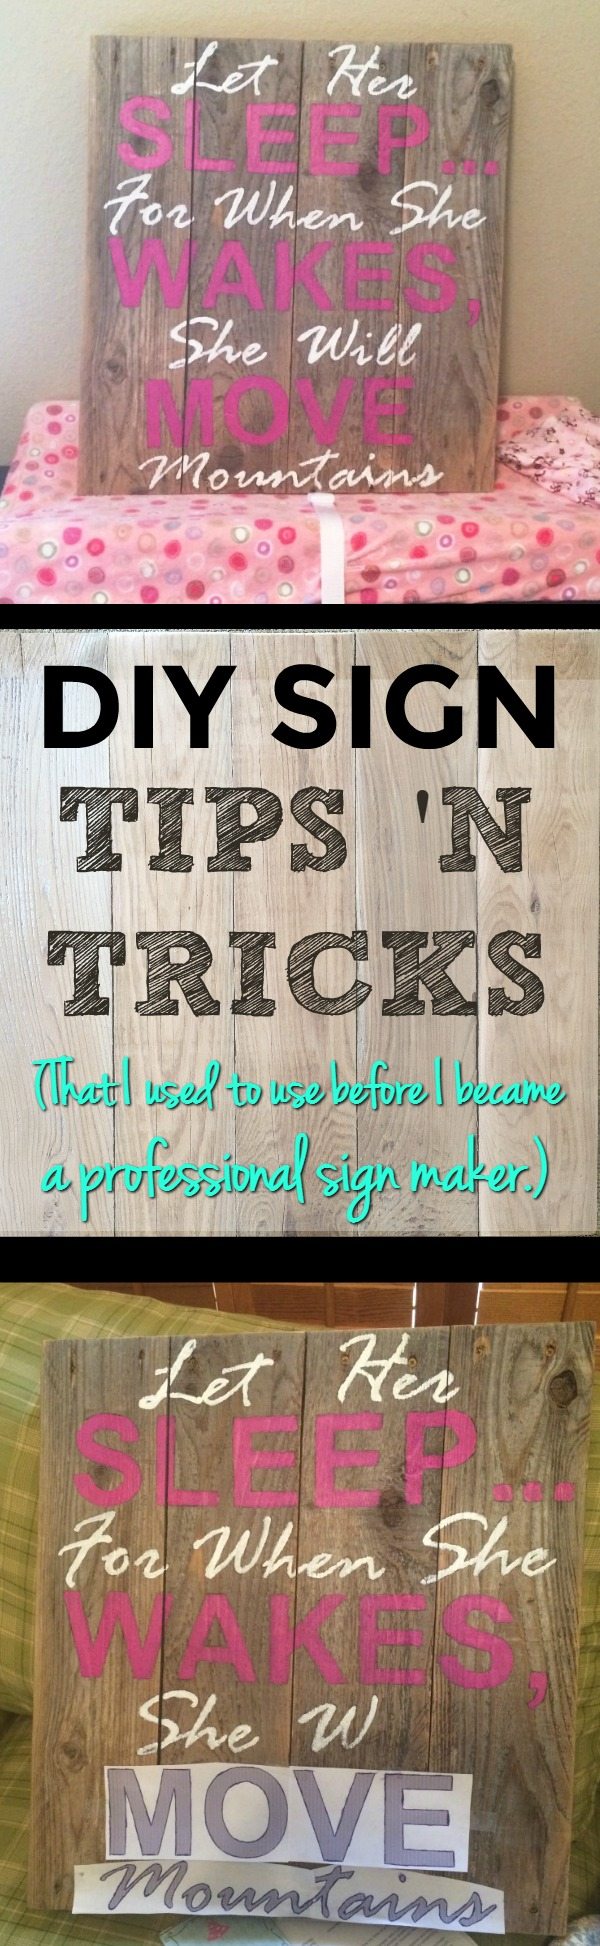 DIY Sign Instructions | Make cheap wood signs | Instructions to make wood signs | DIY sign stencils | How to make signs with wood | DIY reclaimed wood signs | DIY nursery signs